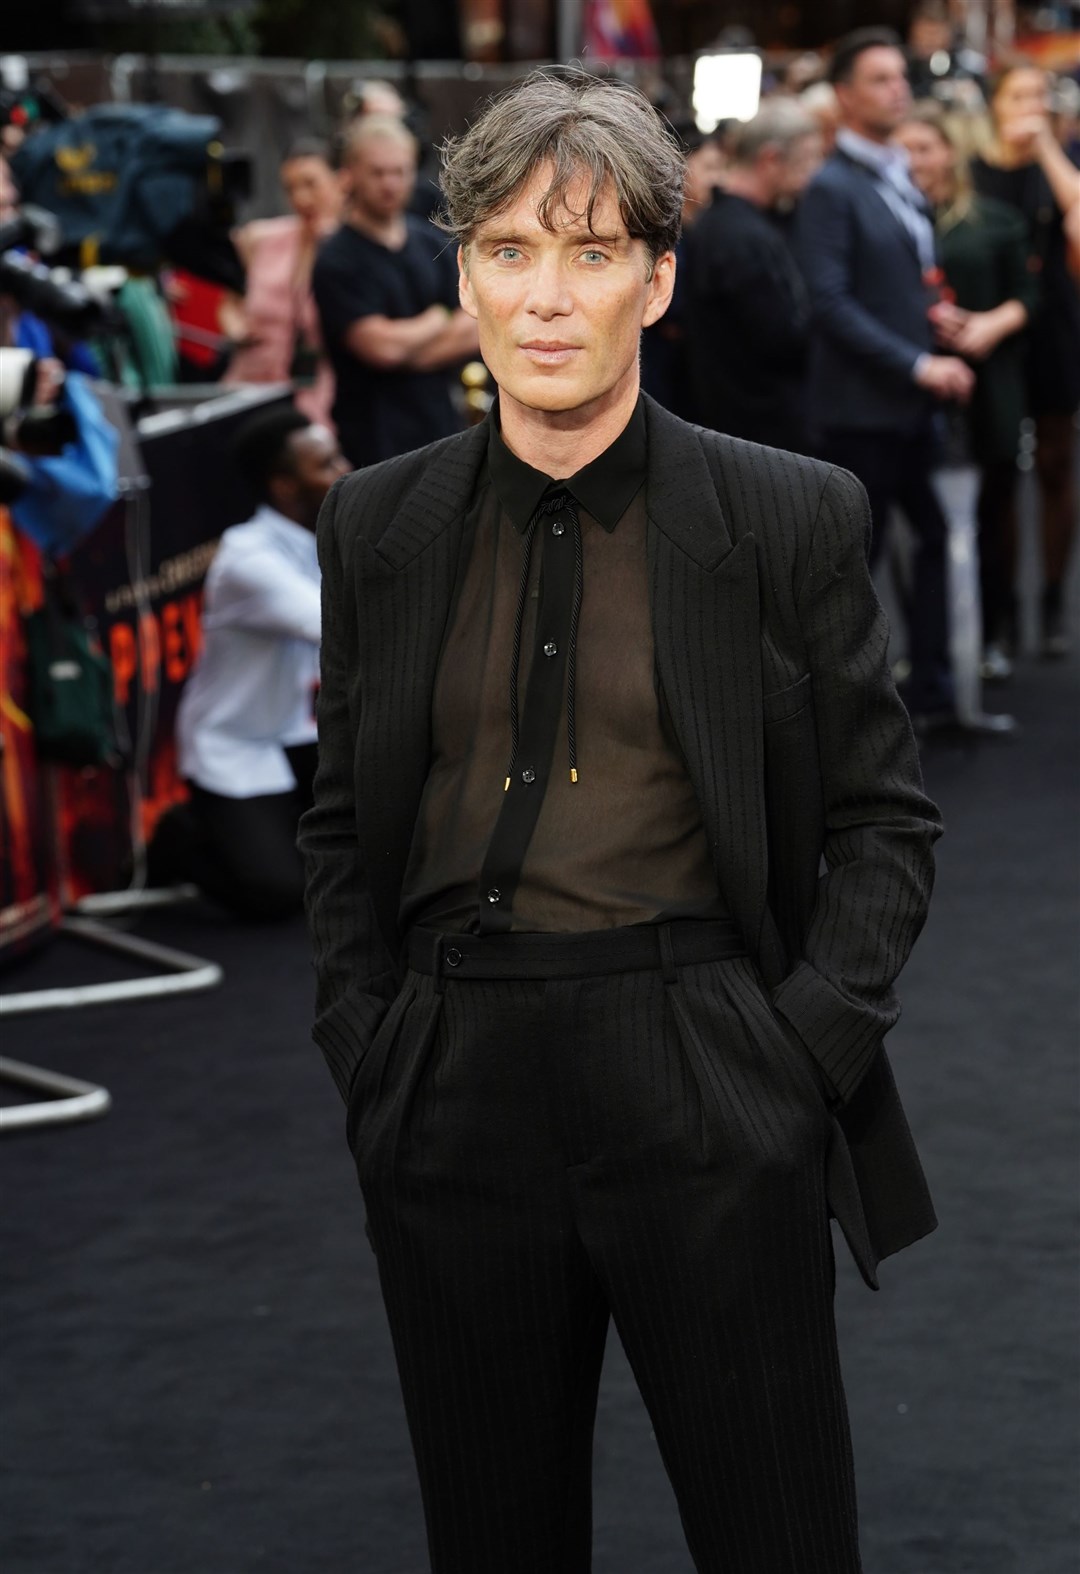 Cillian Murphy arrives for the UK premiere of Oppenheimer at the Odeon Luxe, Leicester Square, London (Ian West/PA)